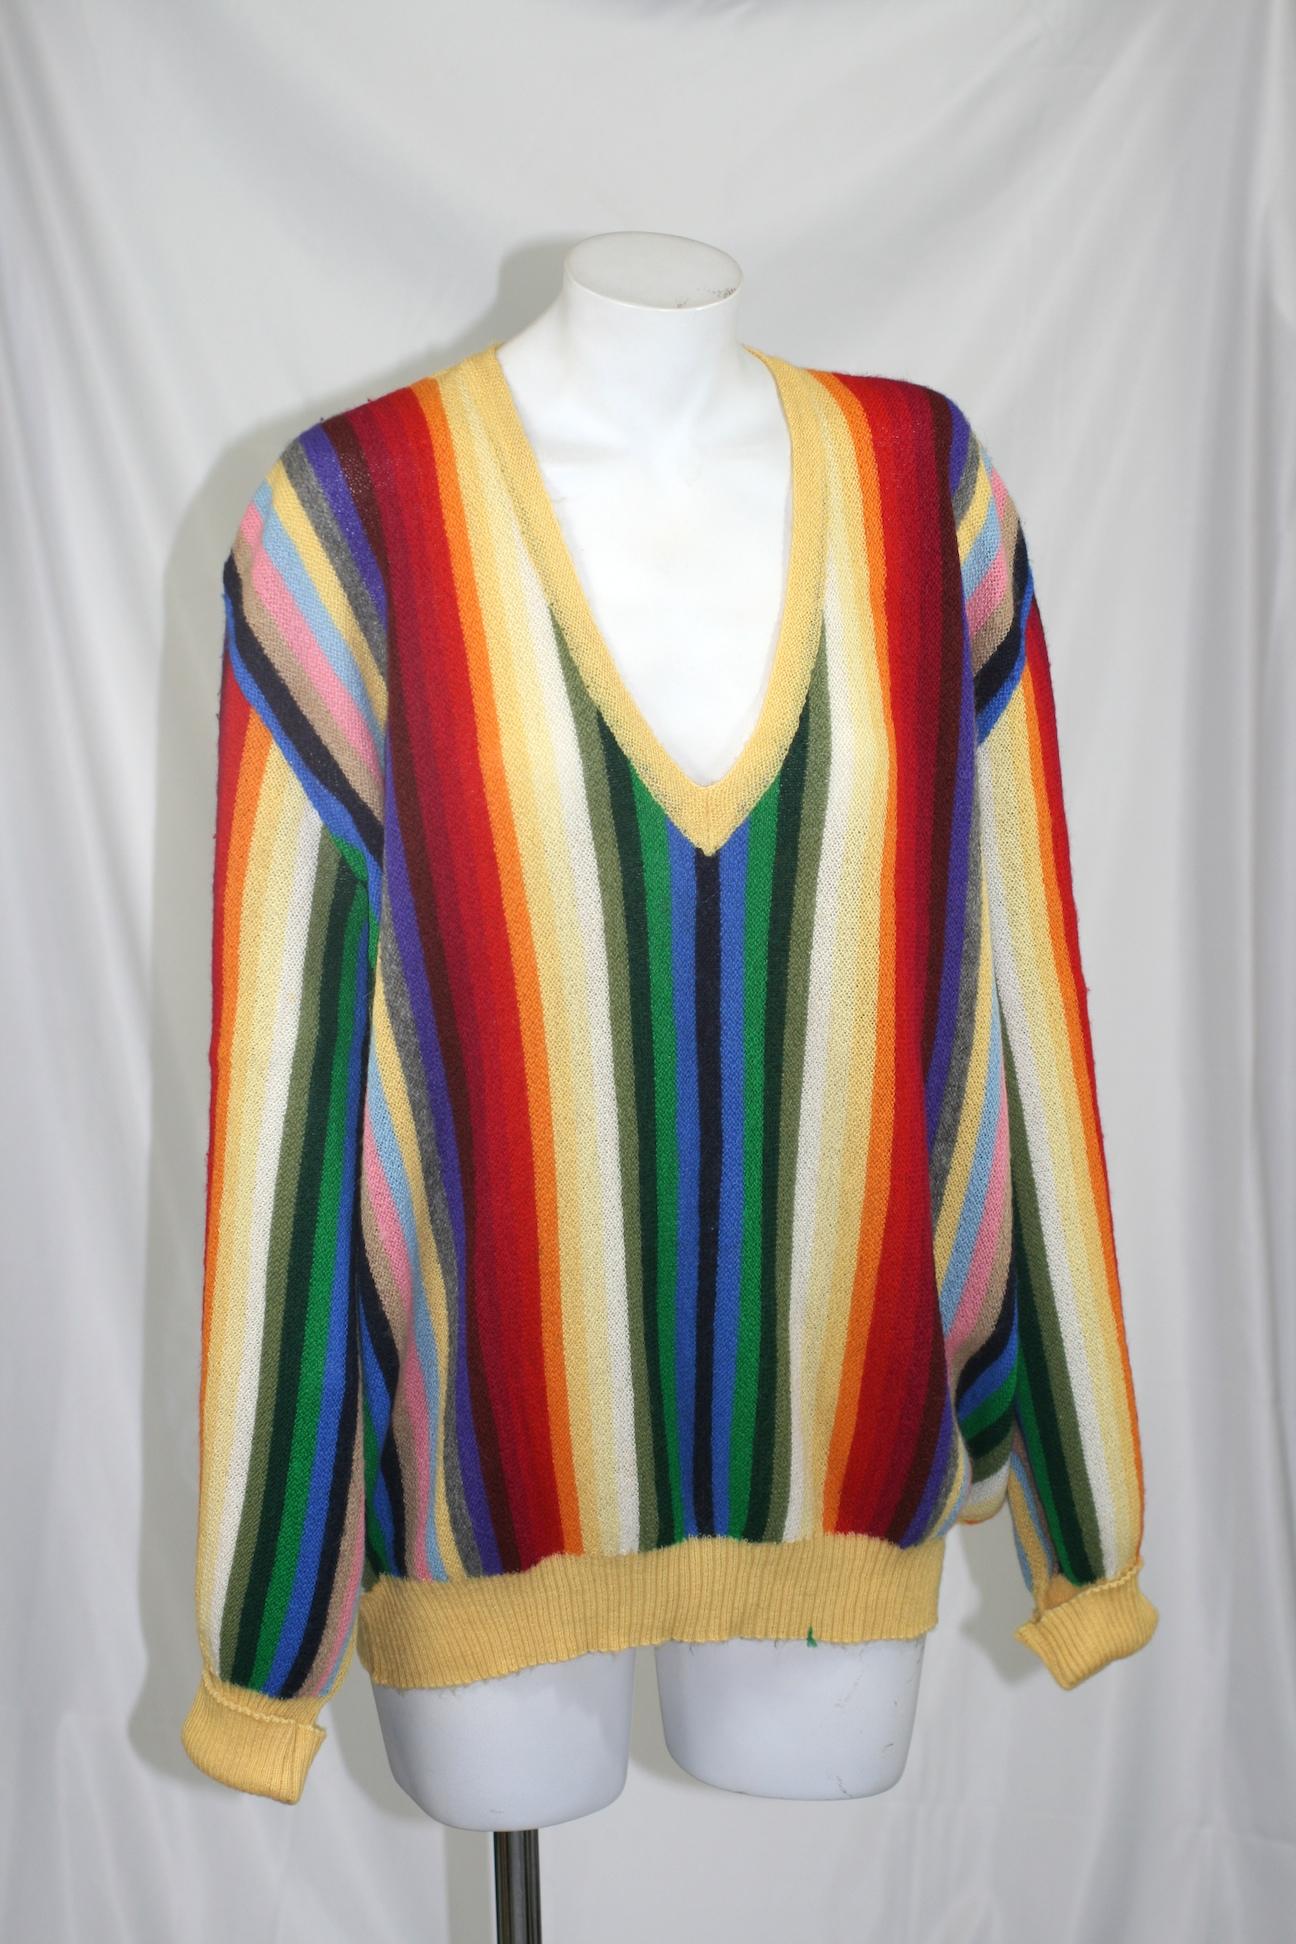 Mens alpaca rainbow stripe sweater from the 1970's, Large size with amazing vibrant striped coloring suitable for women as well. Retailed by Maus and Hoffman, 100% Prime Alpaca, Made in Austria.
Appears unworn, superb quality. Super soft alpaca yarn